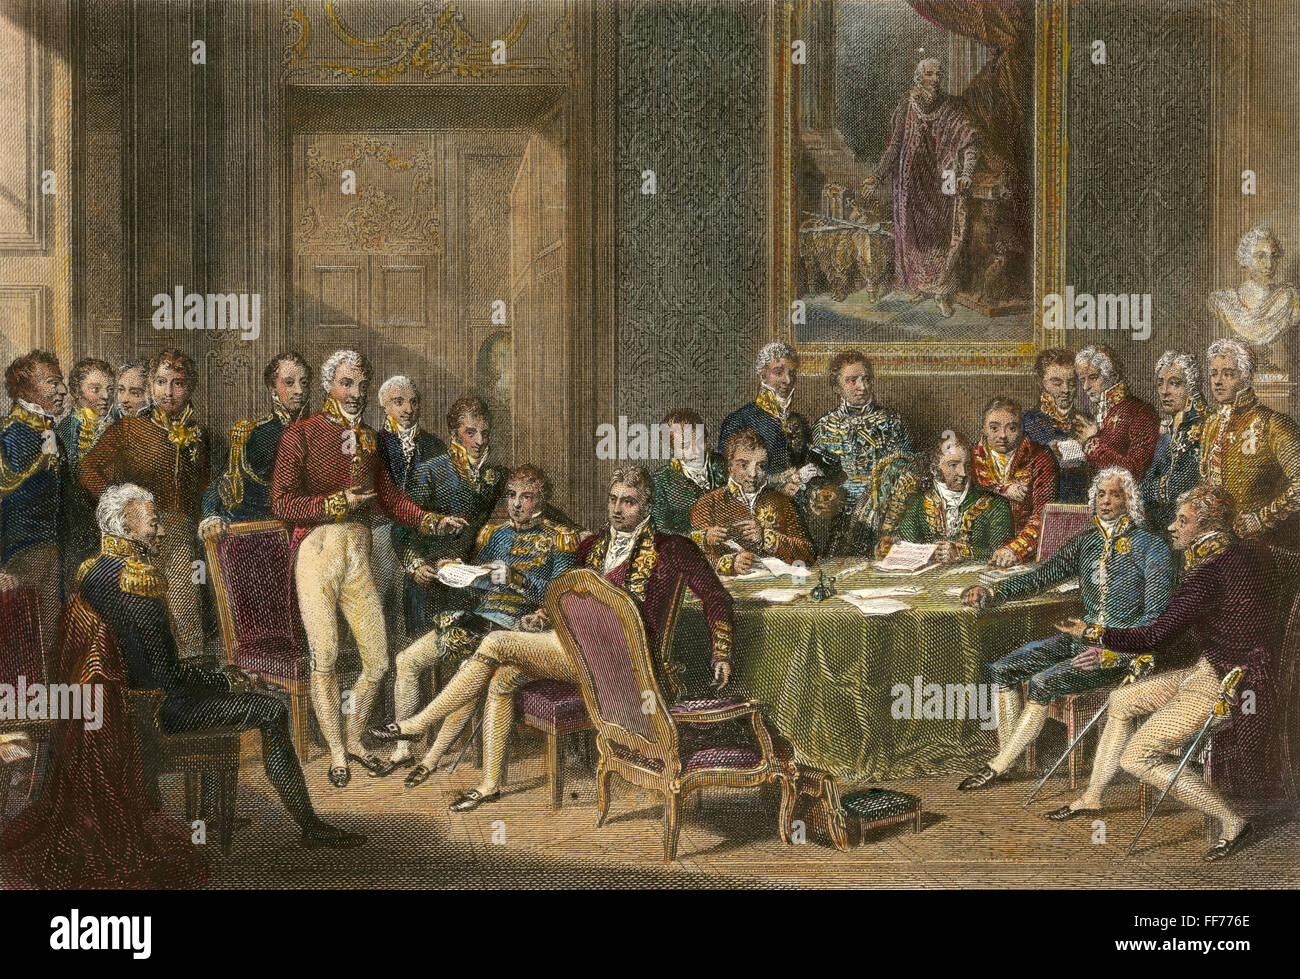 CONGRESS OF VIENNA, 1815. /nThe Congress of Vienna, 1815. Arthur Wellesley, Duke of Wellington stands at far left, Prince Klemens von Metternich stands sixth from left, Robert Castlereagh is seated at center, and Prince Charles Talleyrand is seated second Stock Photo